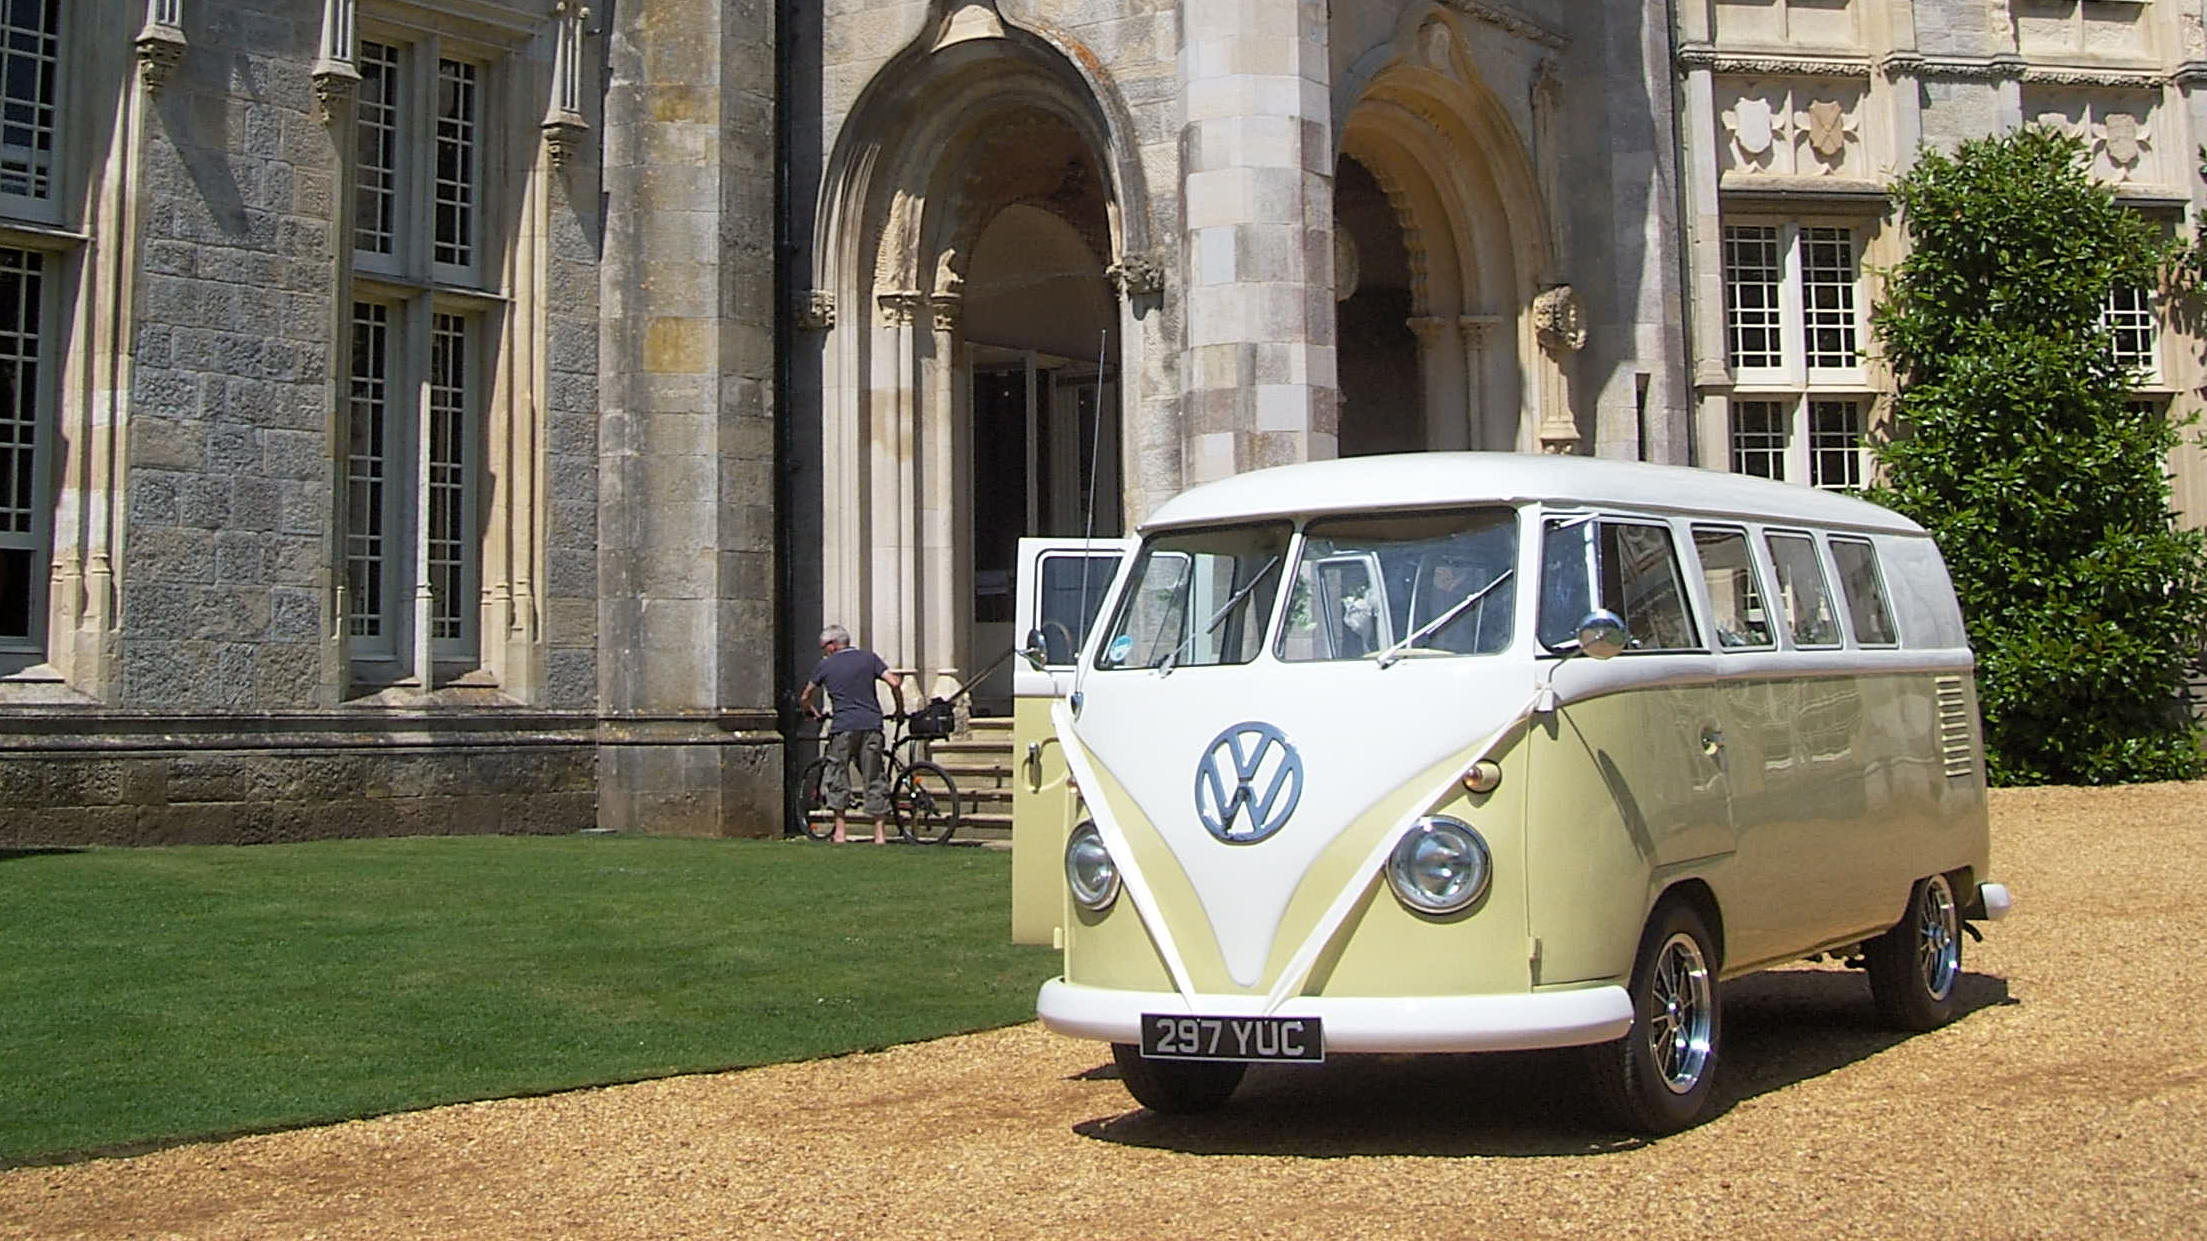 Retro Classic Volkswagen Campervan decorated with white ribbons at a local Puddletown wedding venue.